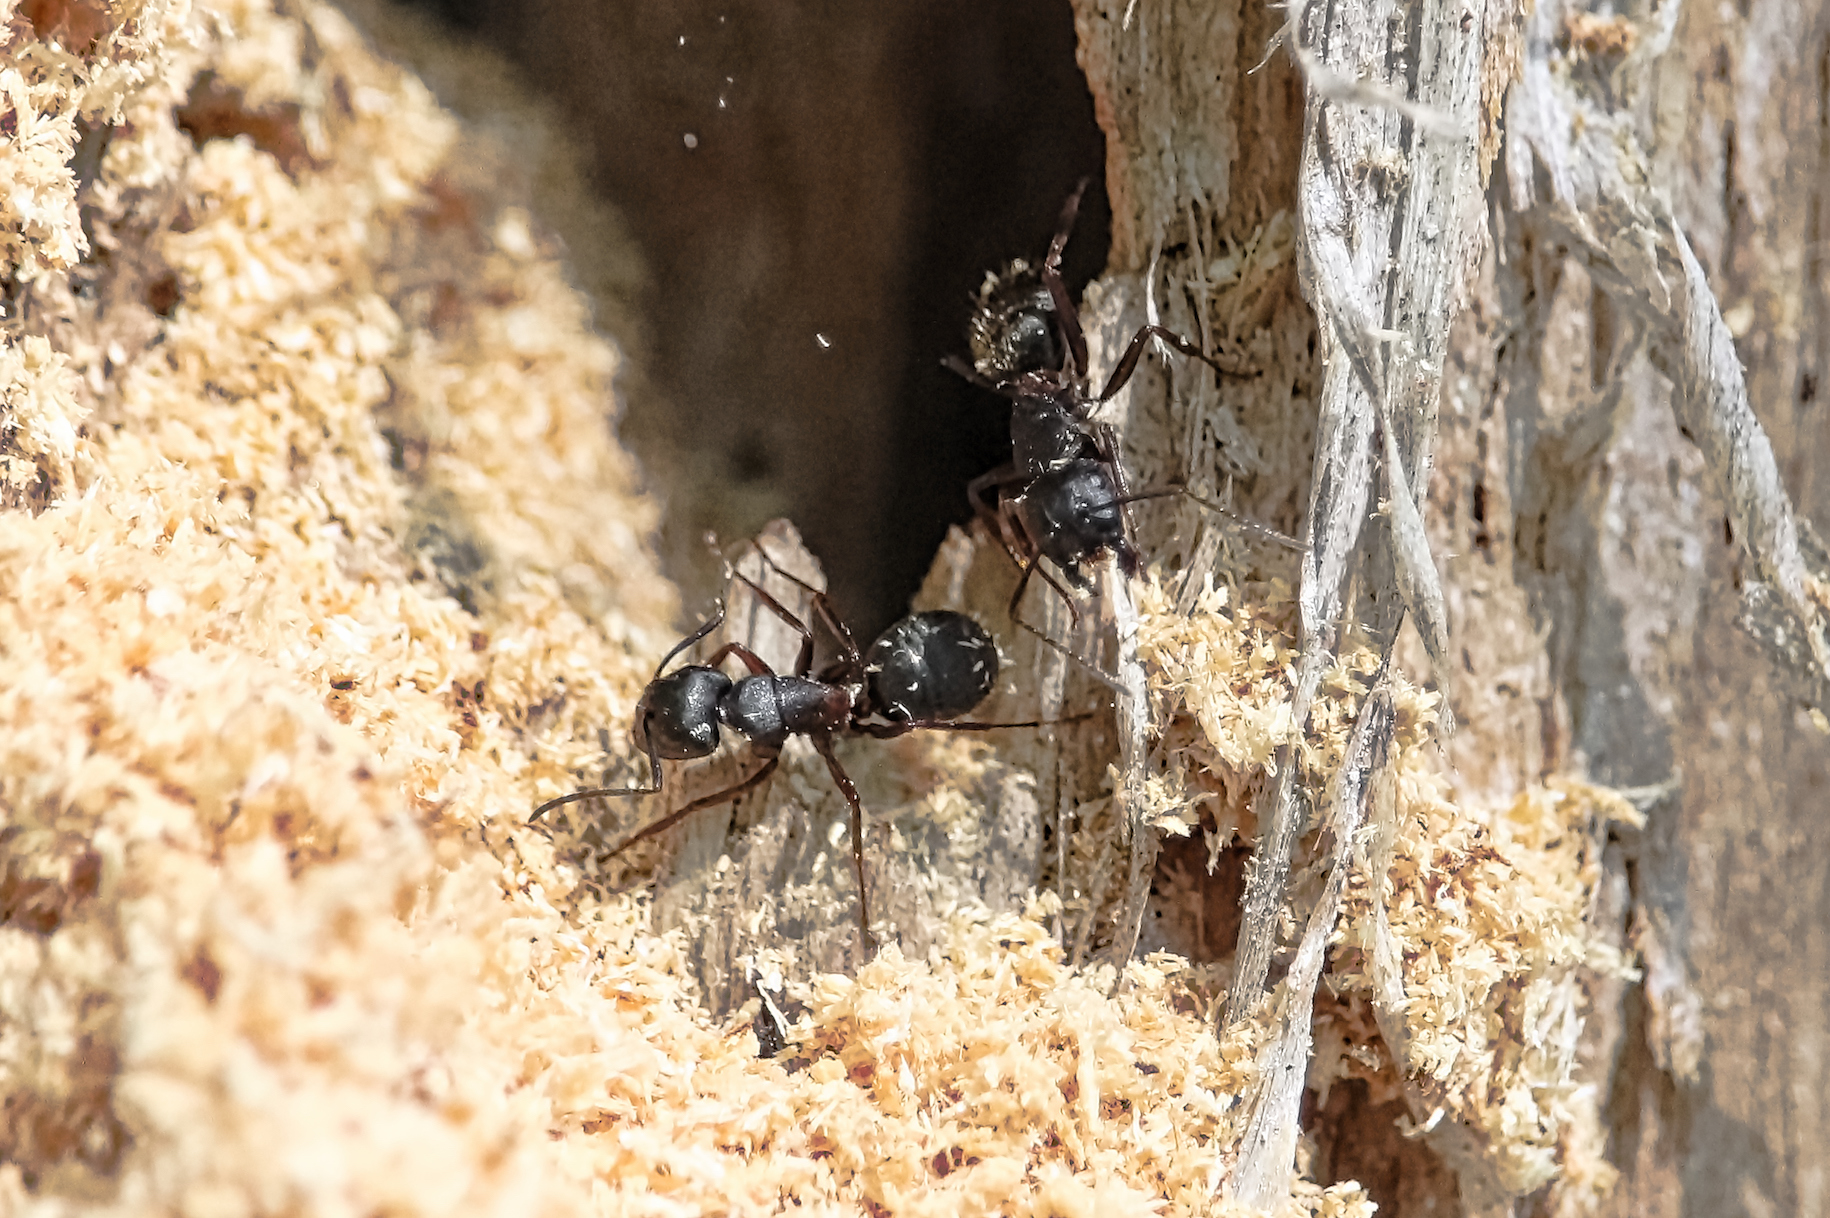 close view of ants crawling on light colored wood of dead tree trunk